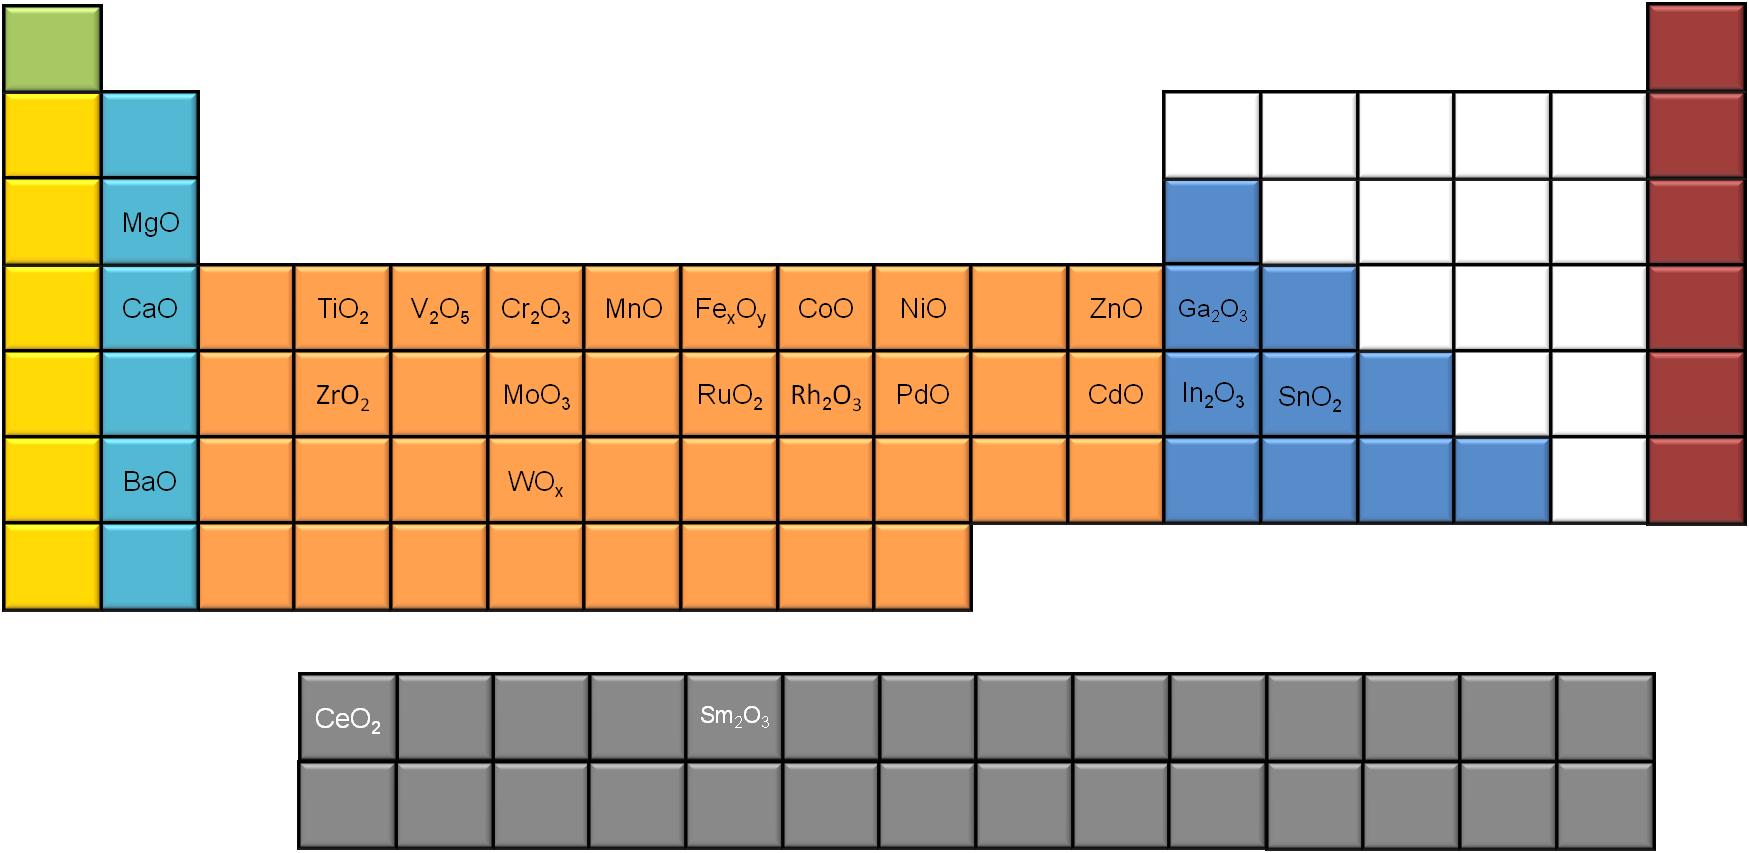 “Periodic” table of MOx nanoparticles synthesized using the slow decomposition technique.